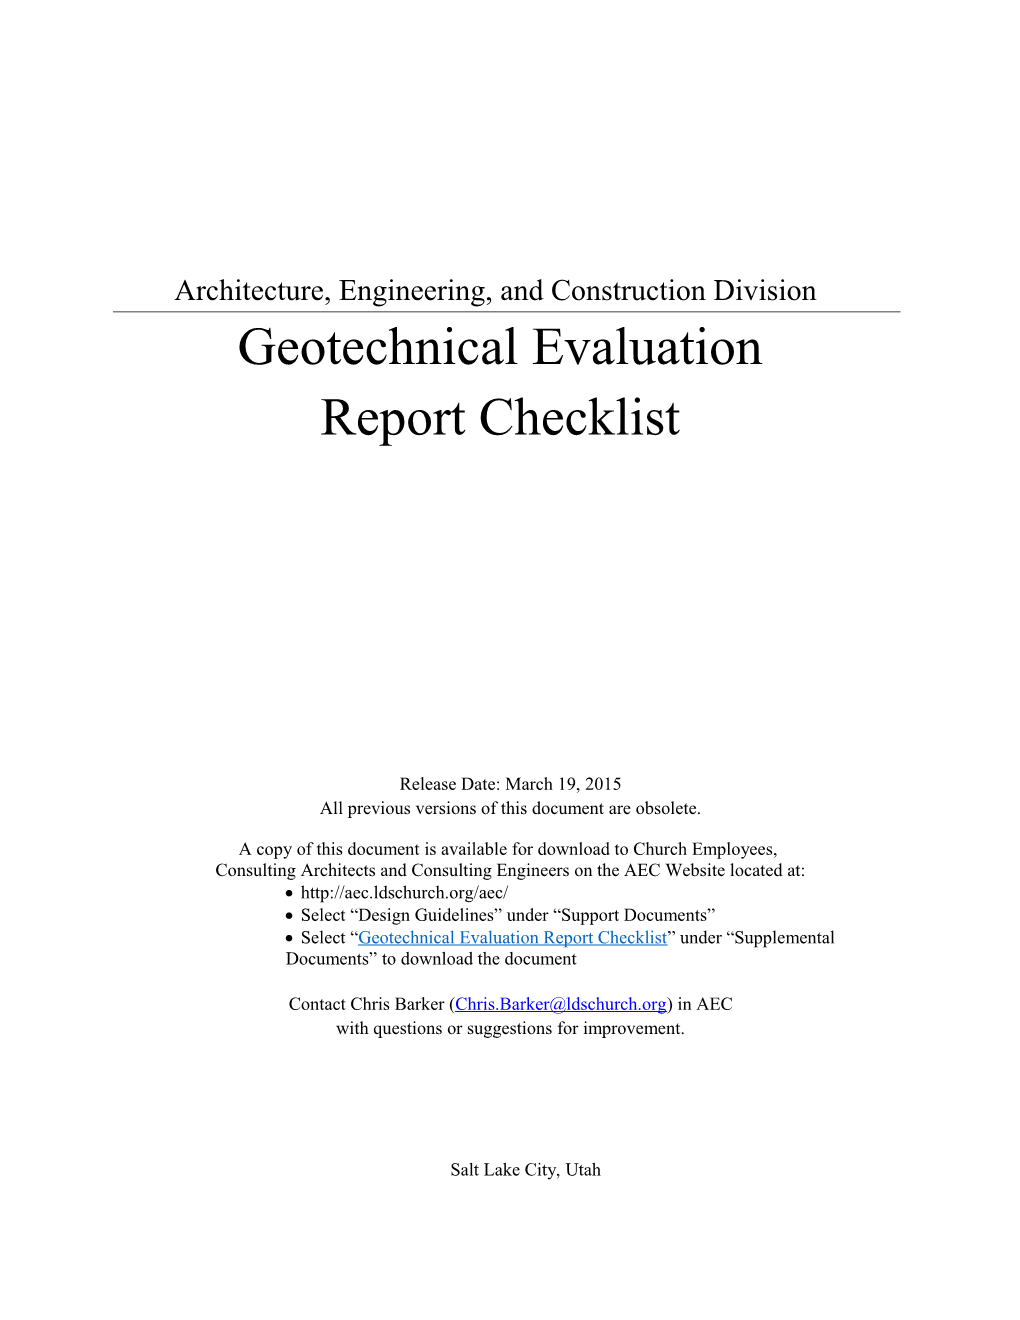 Geotechnical Evaluation Report Checklist